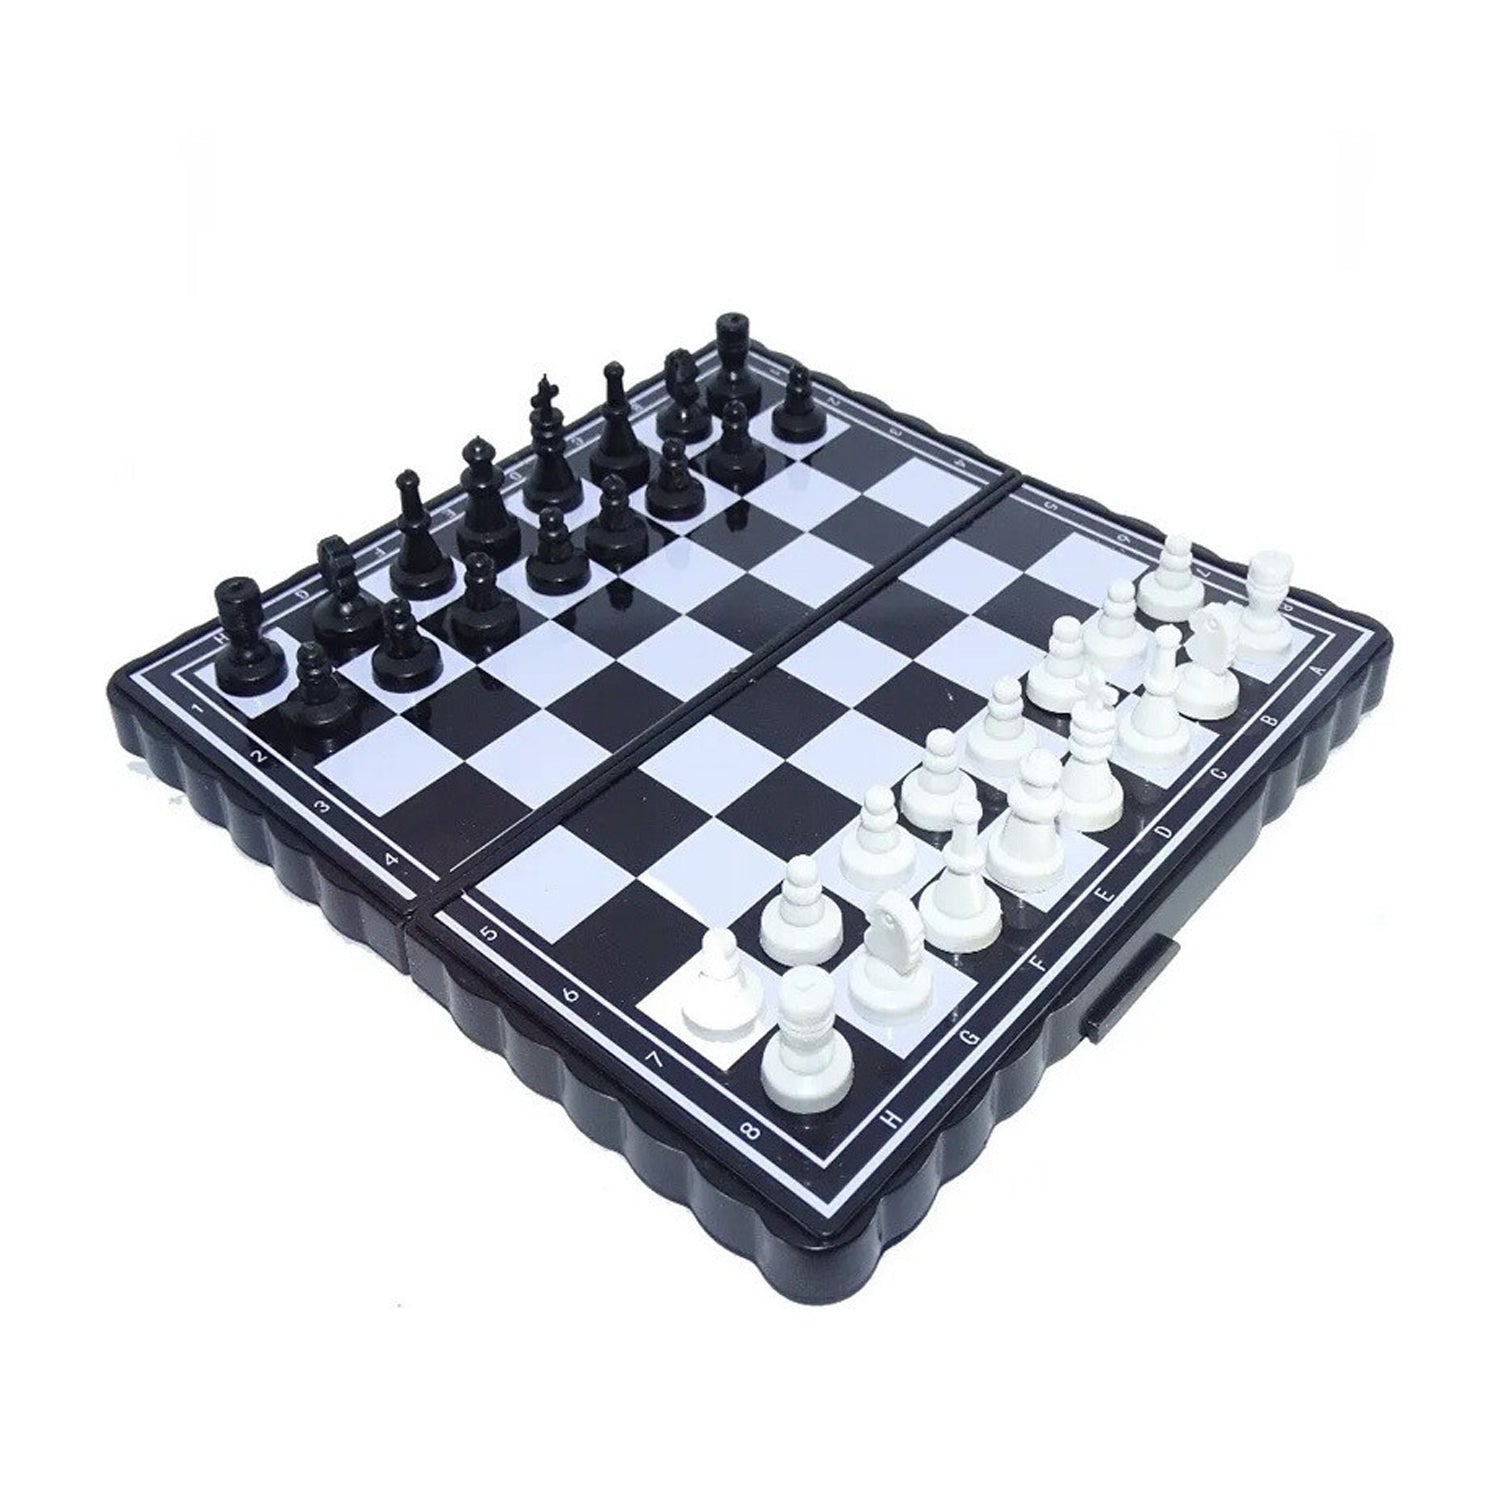 4661 Chess Board 5"x5" Magnetic Chessboard Game Set with Folding Travel Portable Case Travel Chessgame Premium Classic Black & Ivory Color Pieces Prefect Gift for Kids and Adults |1 Pcs| DeoDap